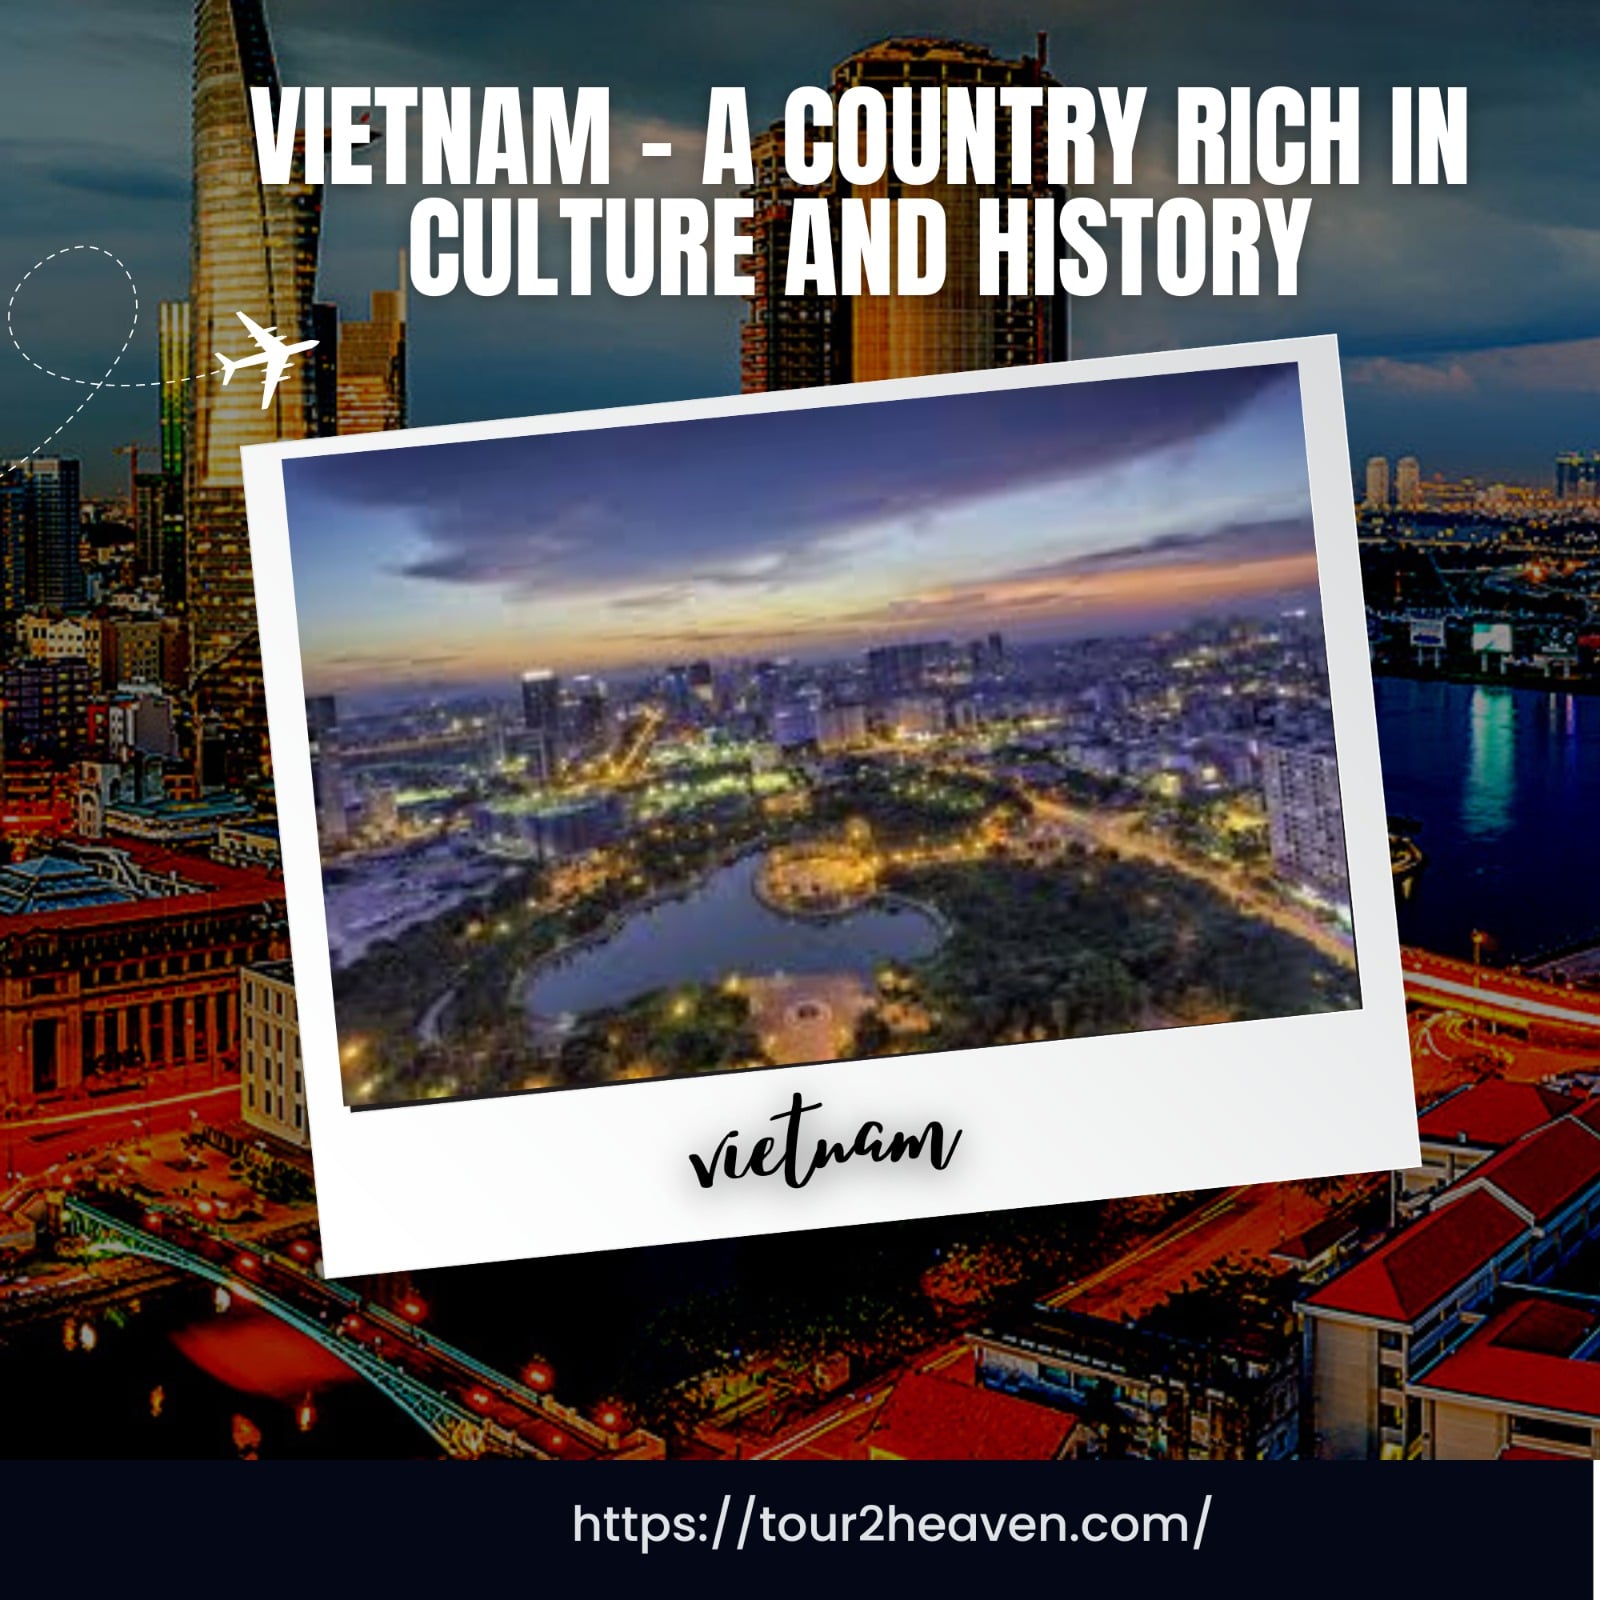 Vietnam – A Country Rich in Culture and History